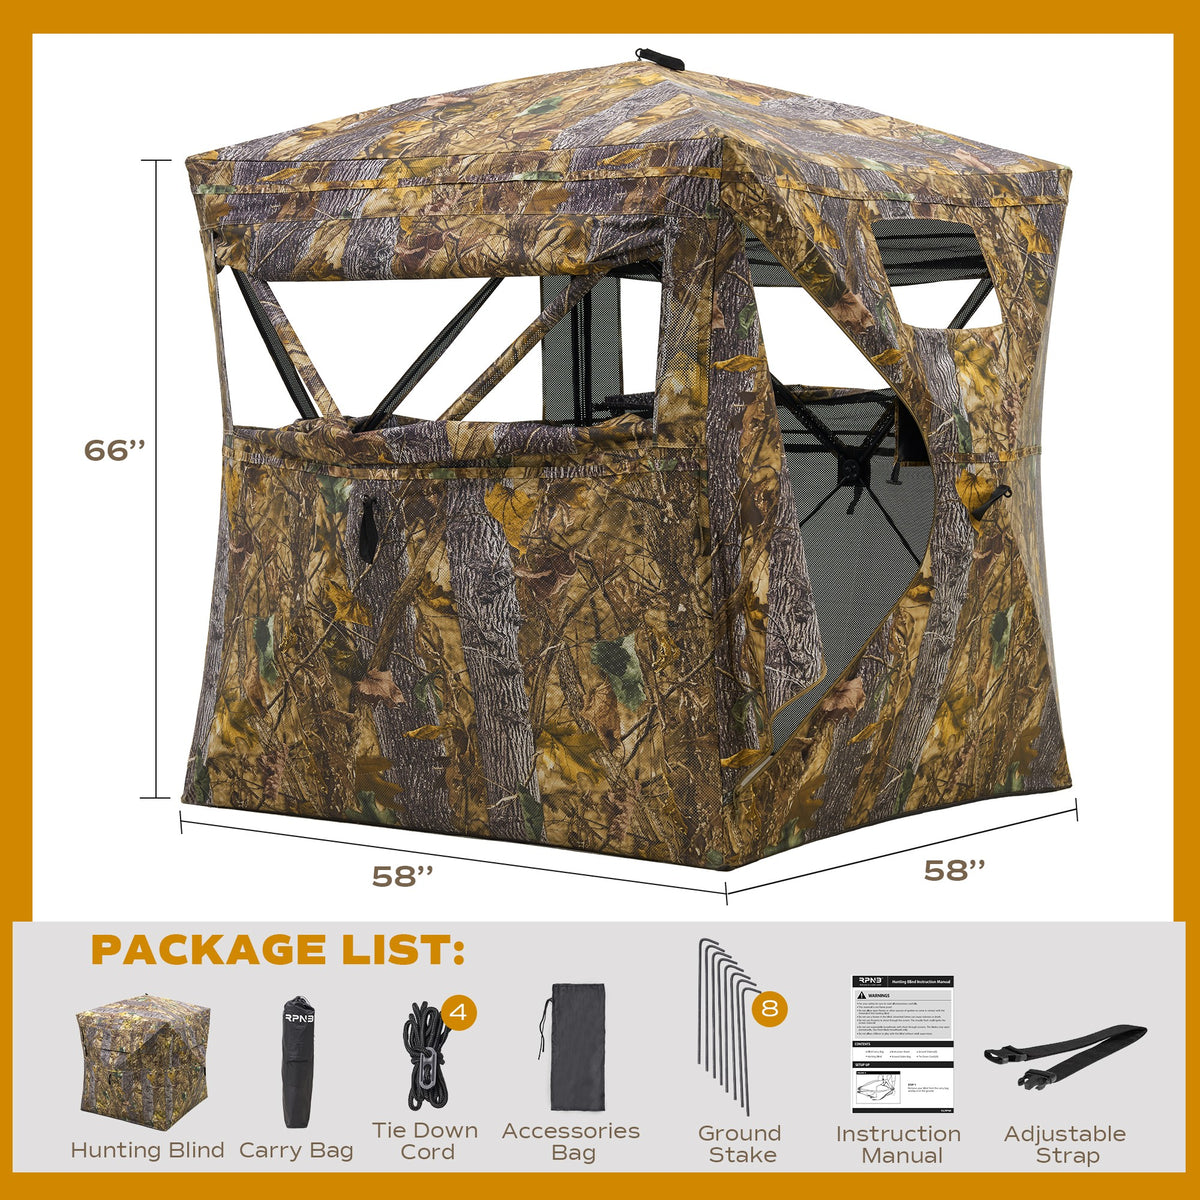 RPNB HGB-1 Hunting Blind One-Way 270 Degree See Through 2-3 Person Portable Pop-Up Dimensions and Package List